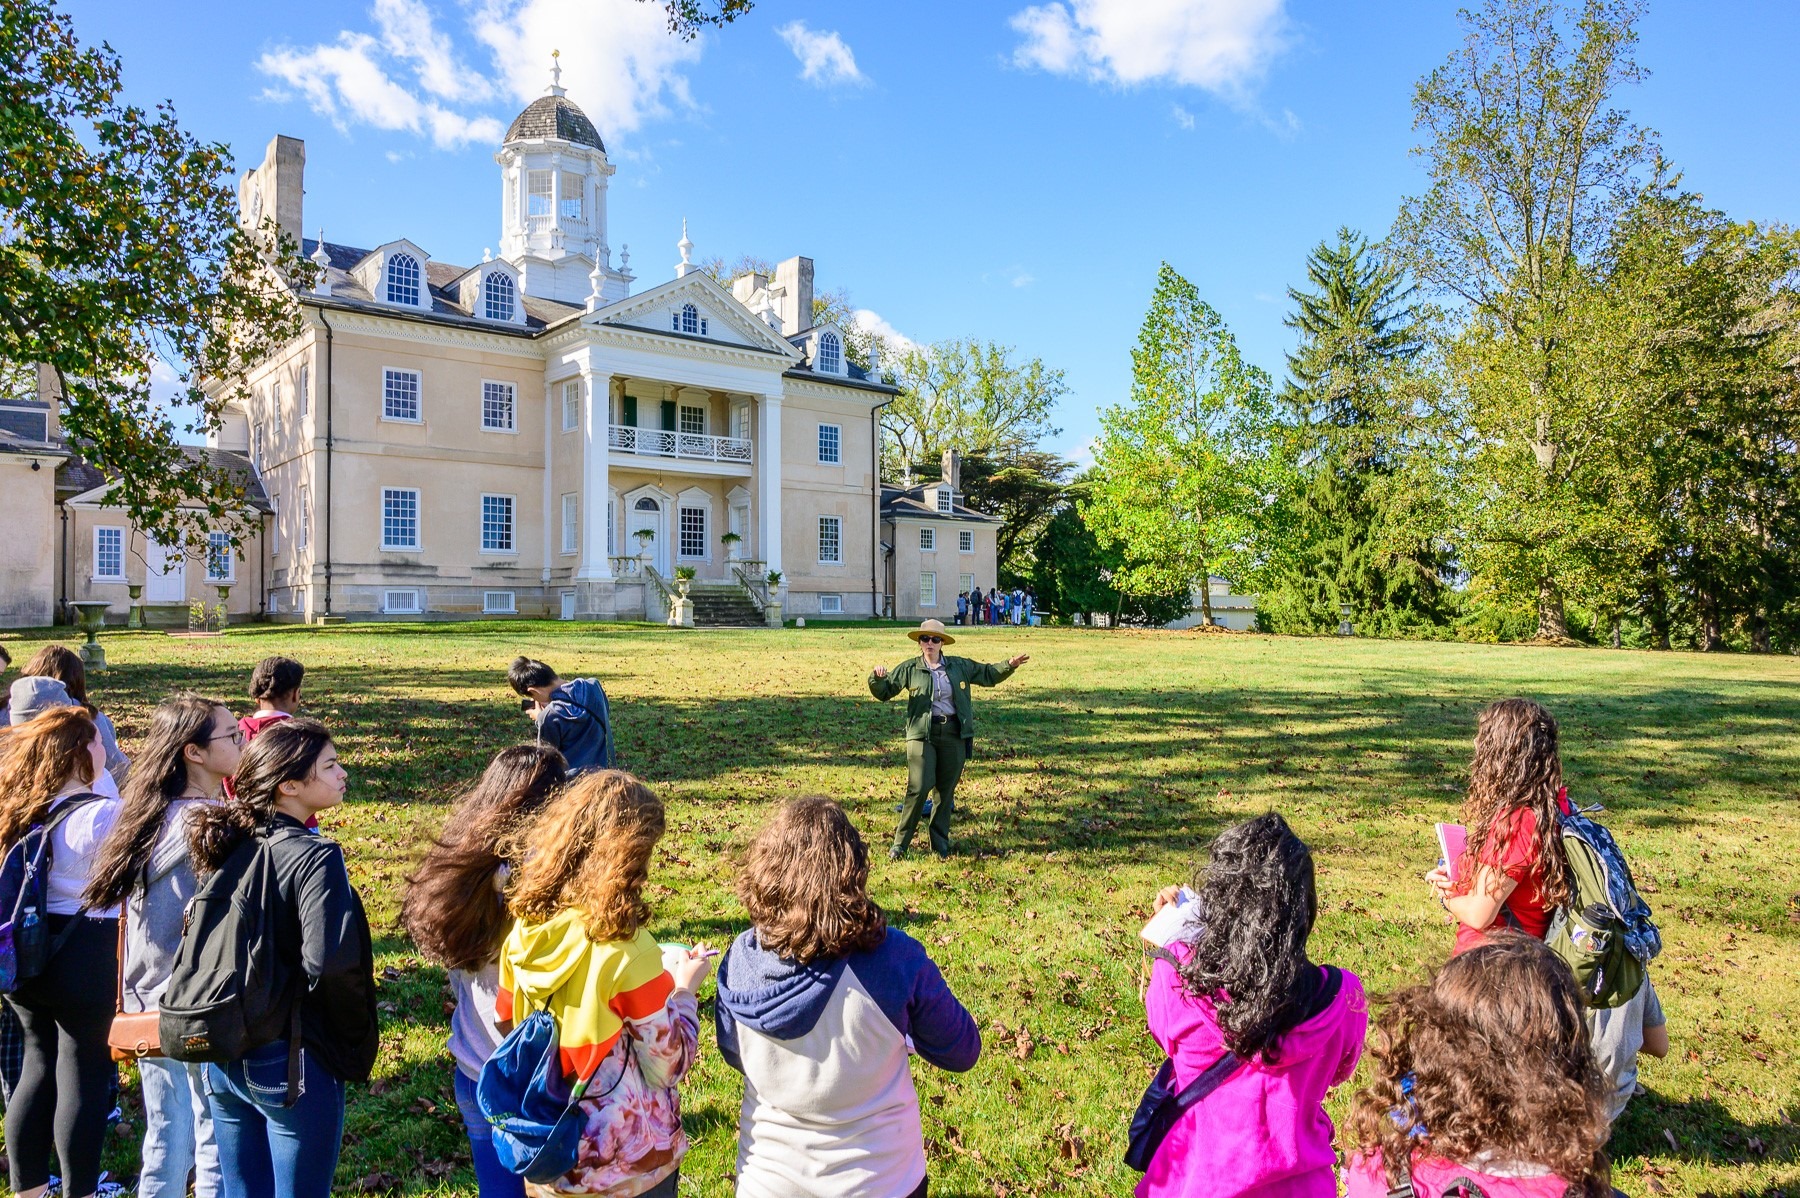 Students with their backs turned, face a uniformed park ranger who is gesturing to a large pale yellow house in the background.